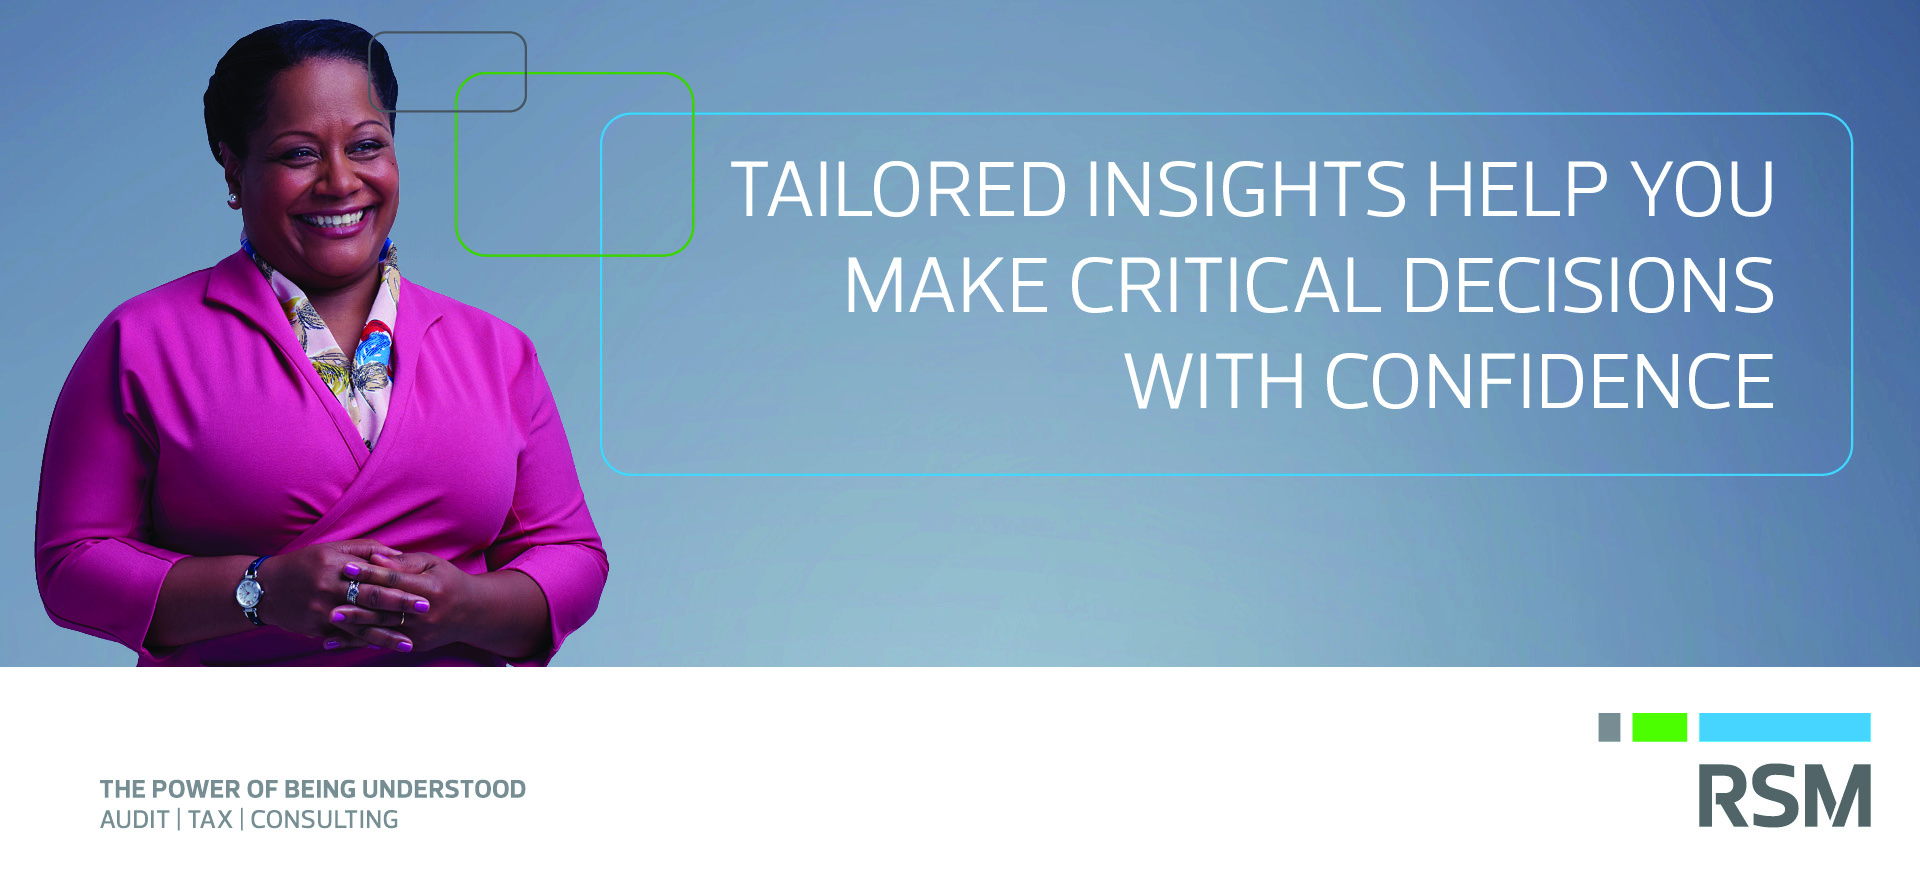 Tailored insights help you make crticial decisions with confidence.